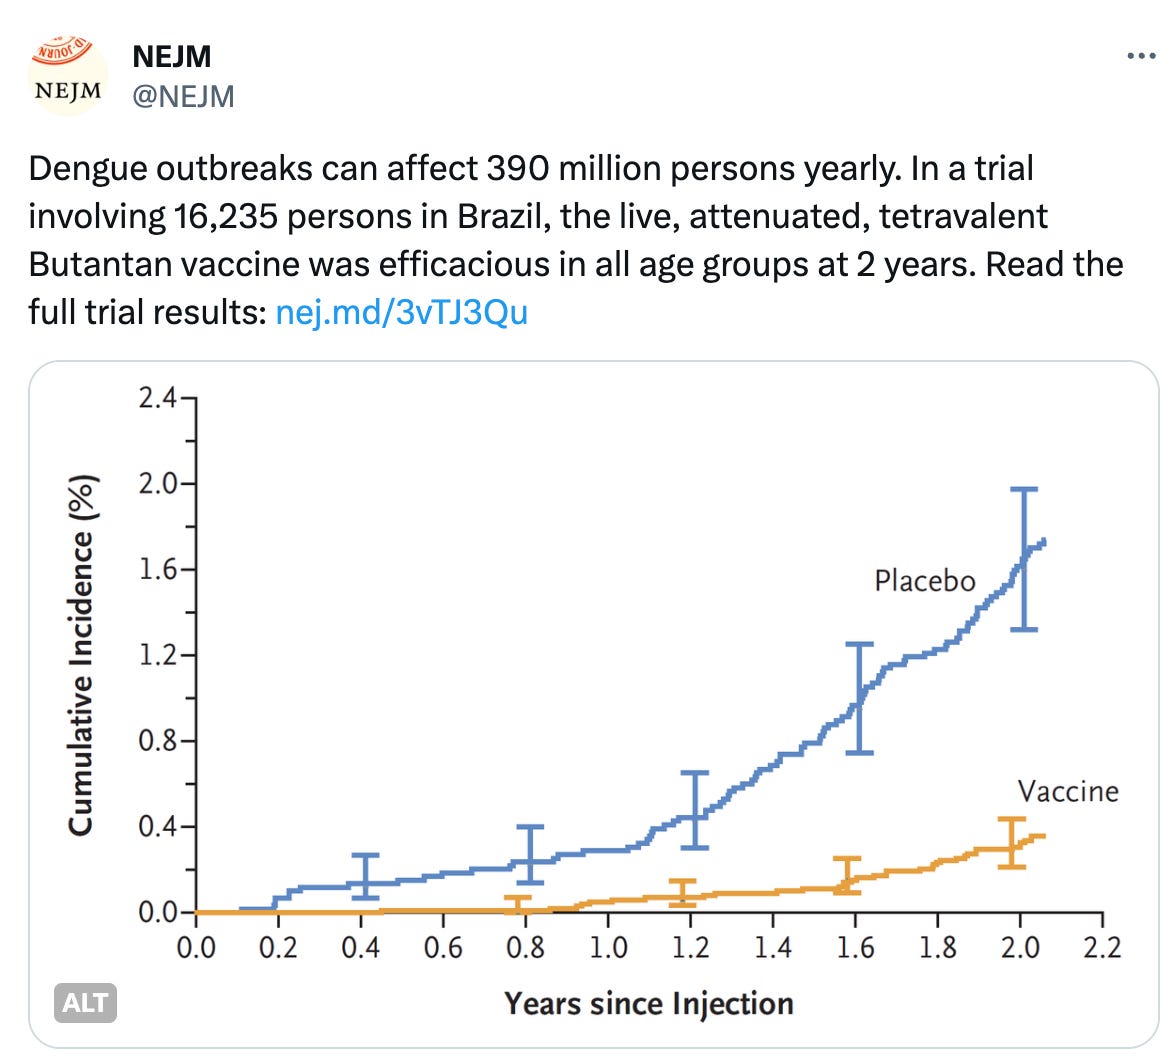  See new posts Conversation NEJM @NEJM Dengue outbreaks can affect 390 million persons yearly. In a trial involving 16,235 persons in Brazil, the live, attenuated, tetravalent Butantan vaccine was efficacious in all age groups at 2 years. Read the full trial results: https://nej.md/3vTJ3Qu